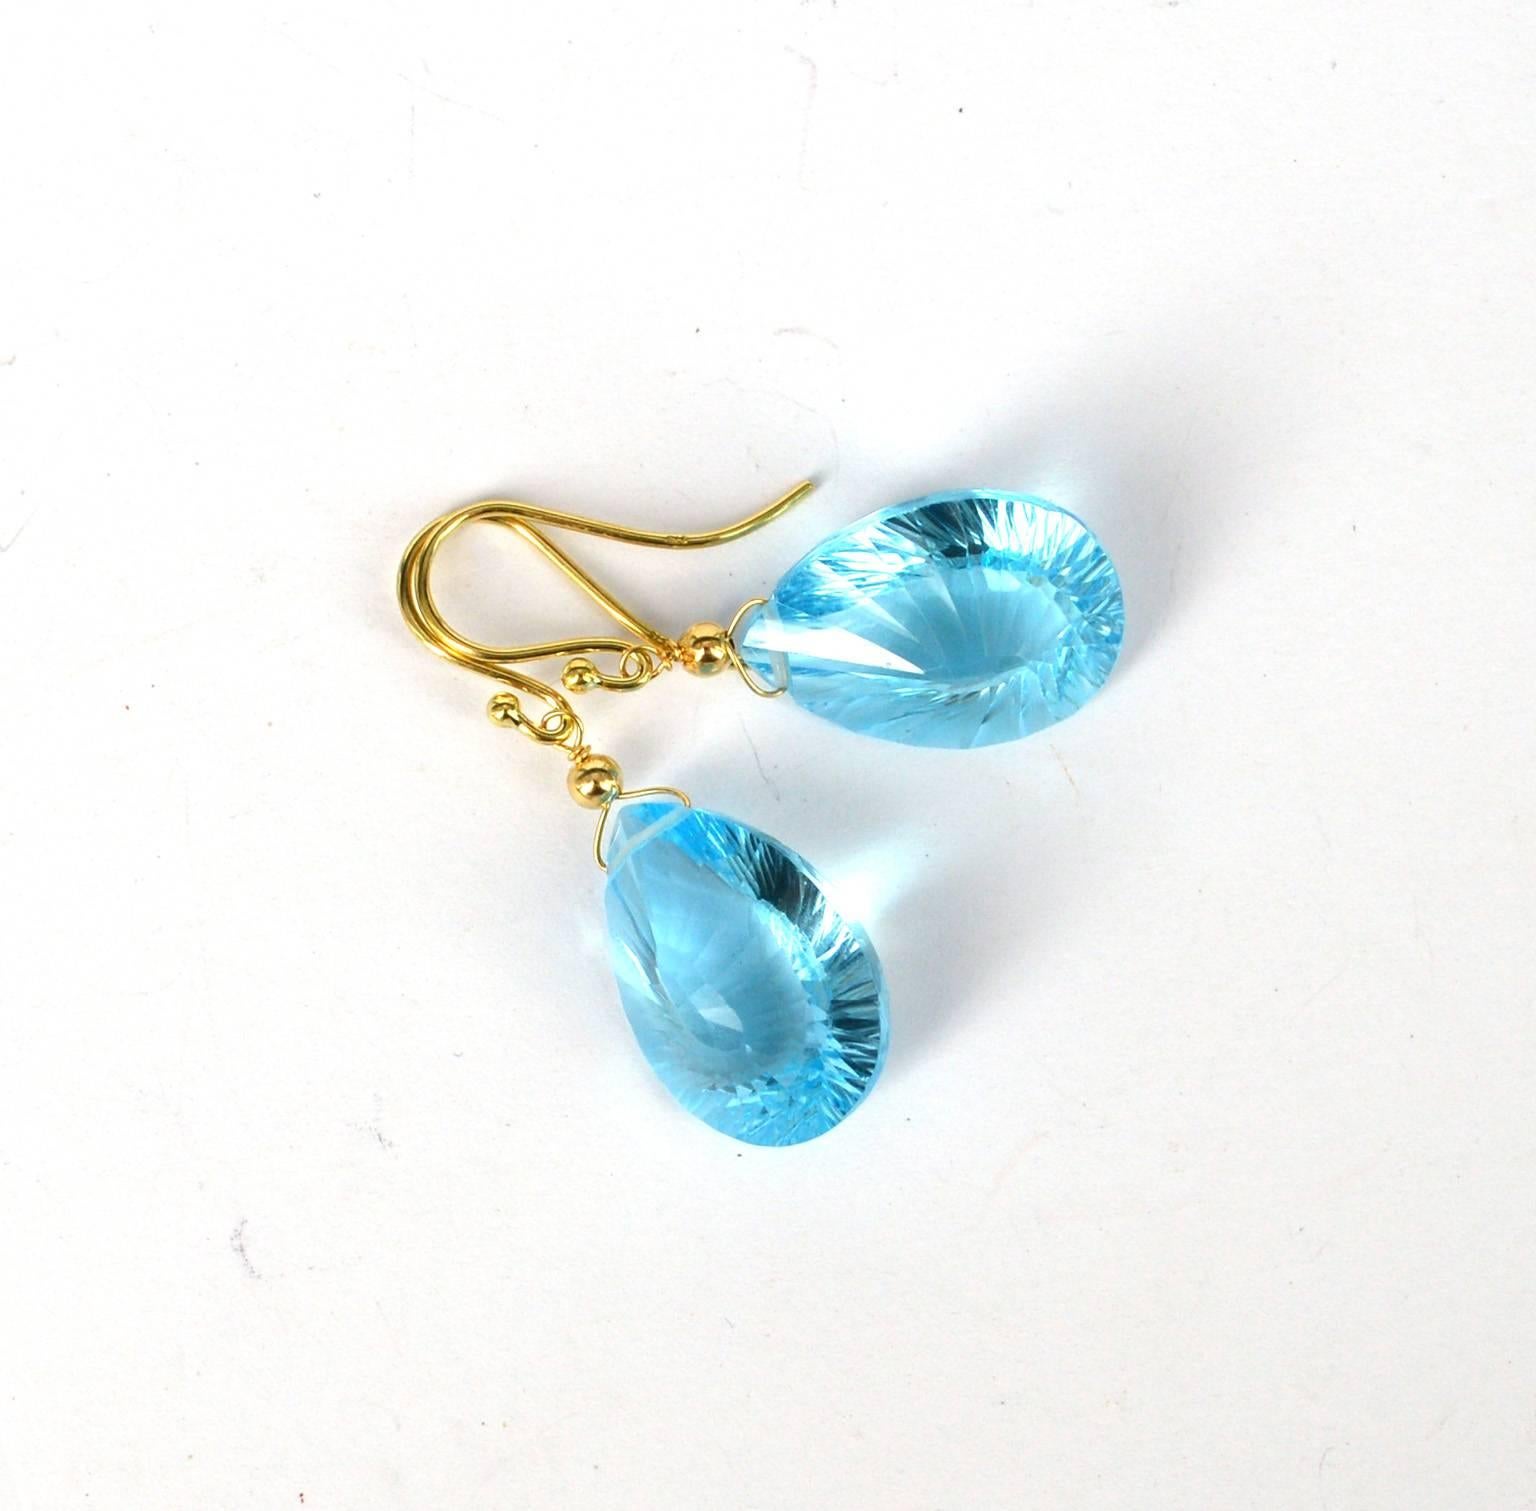 Contemporary Decadent Jewels Blue Topaz Gold Earrings